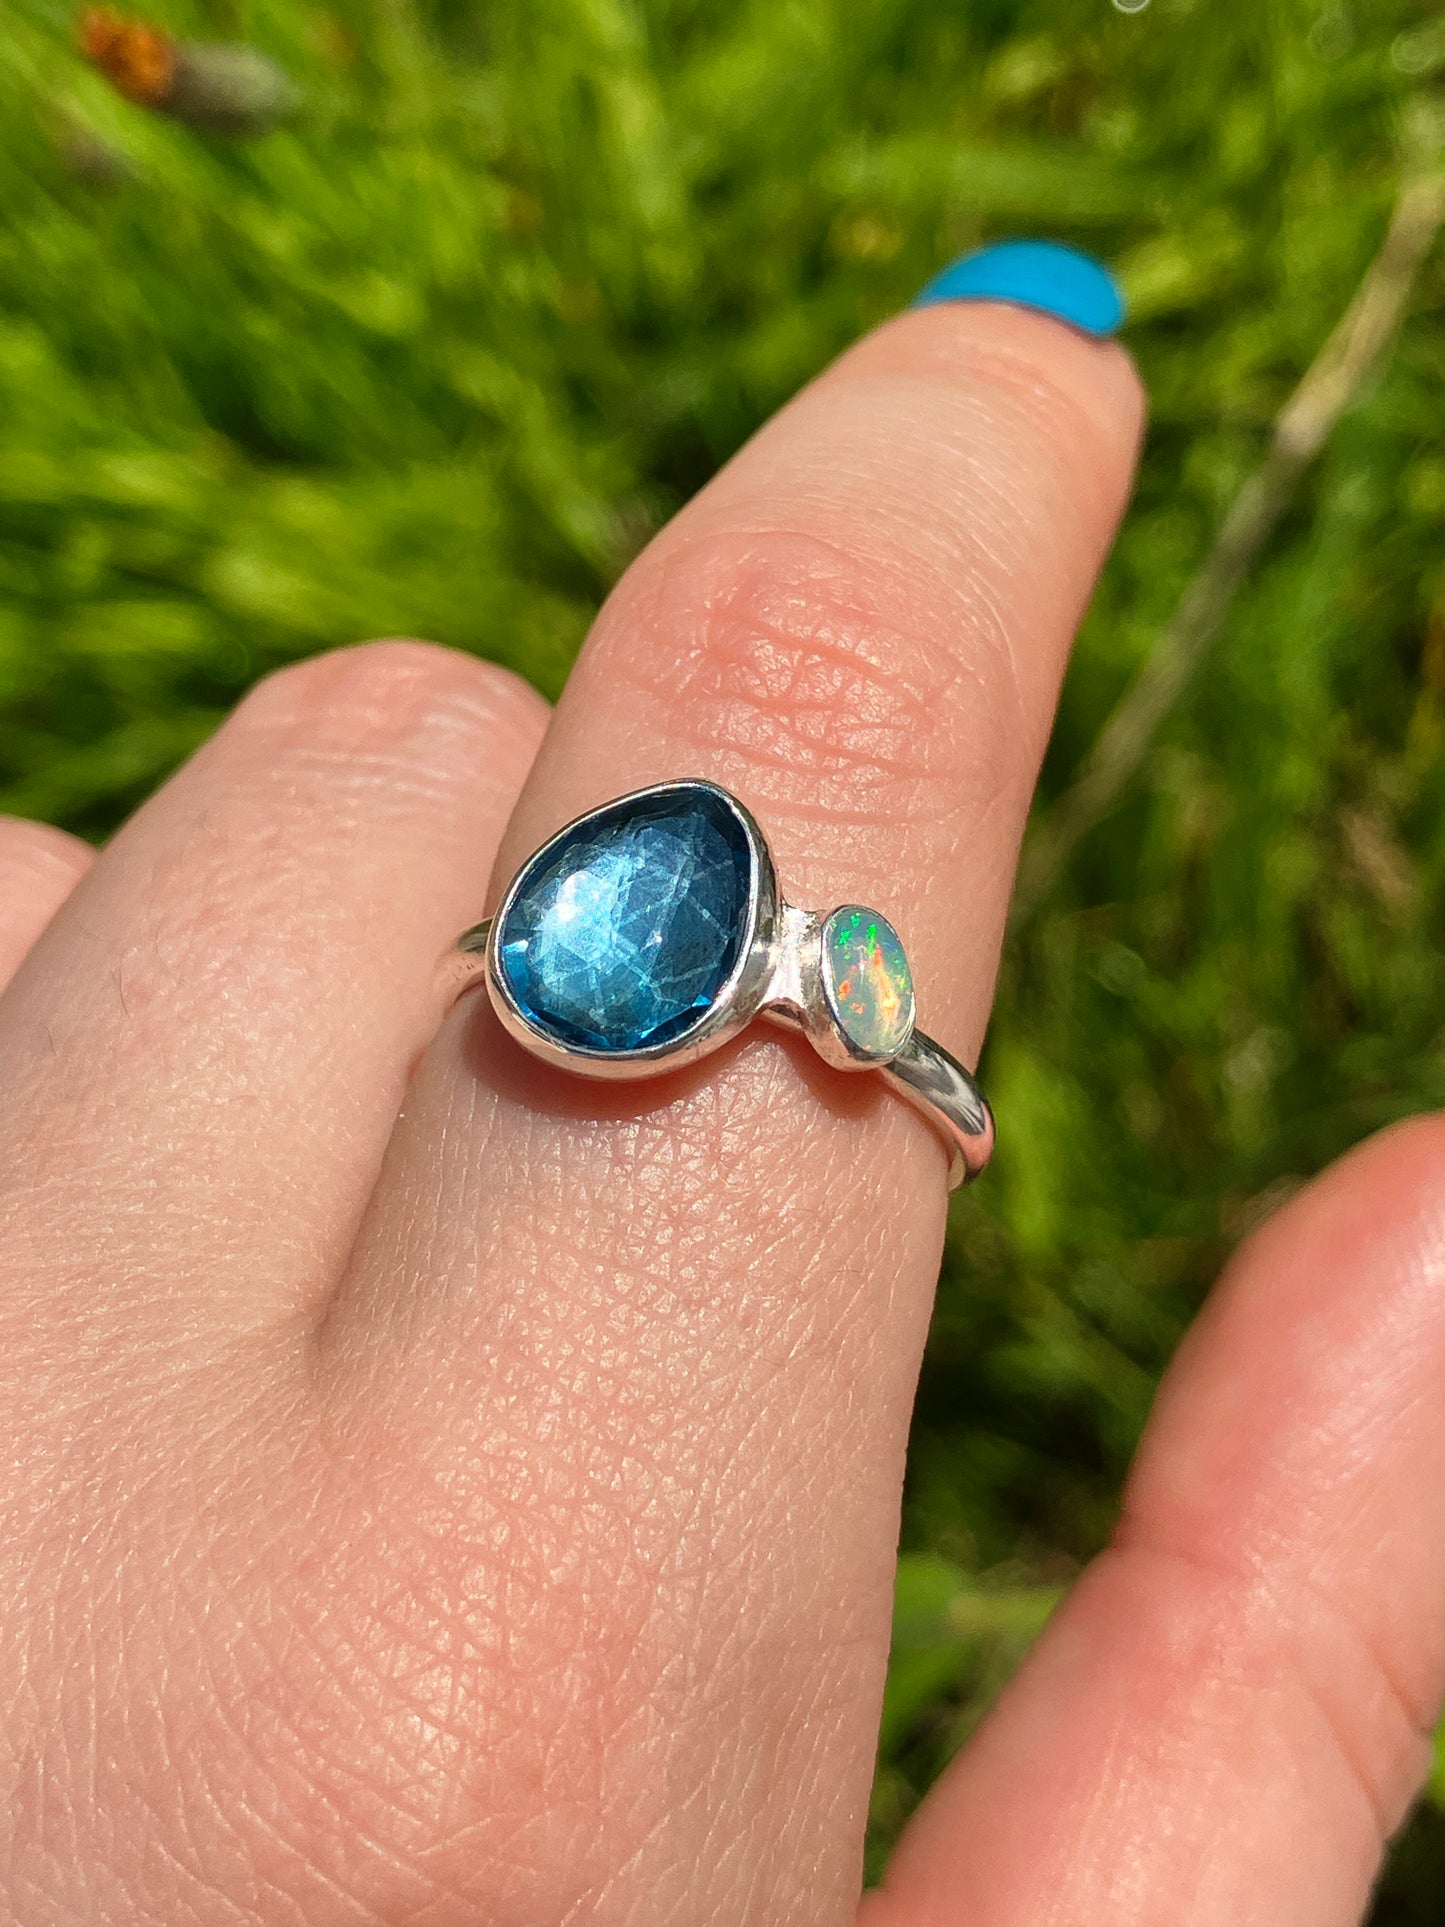 London Blue Topaz, Opal and Sterling Silver Ring - UK Size Q